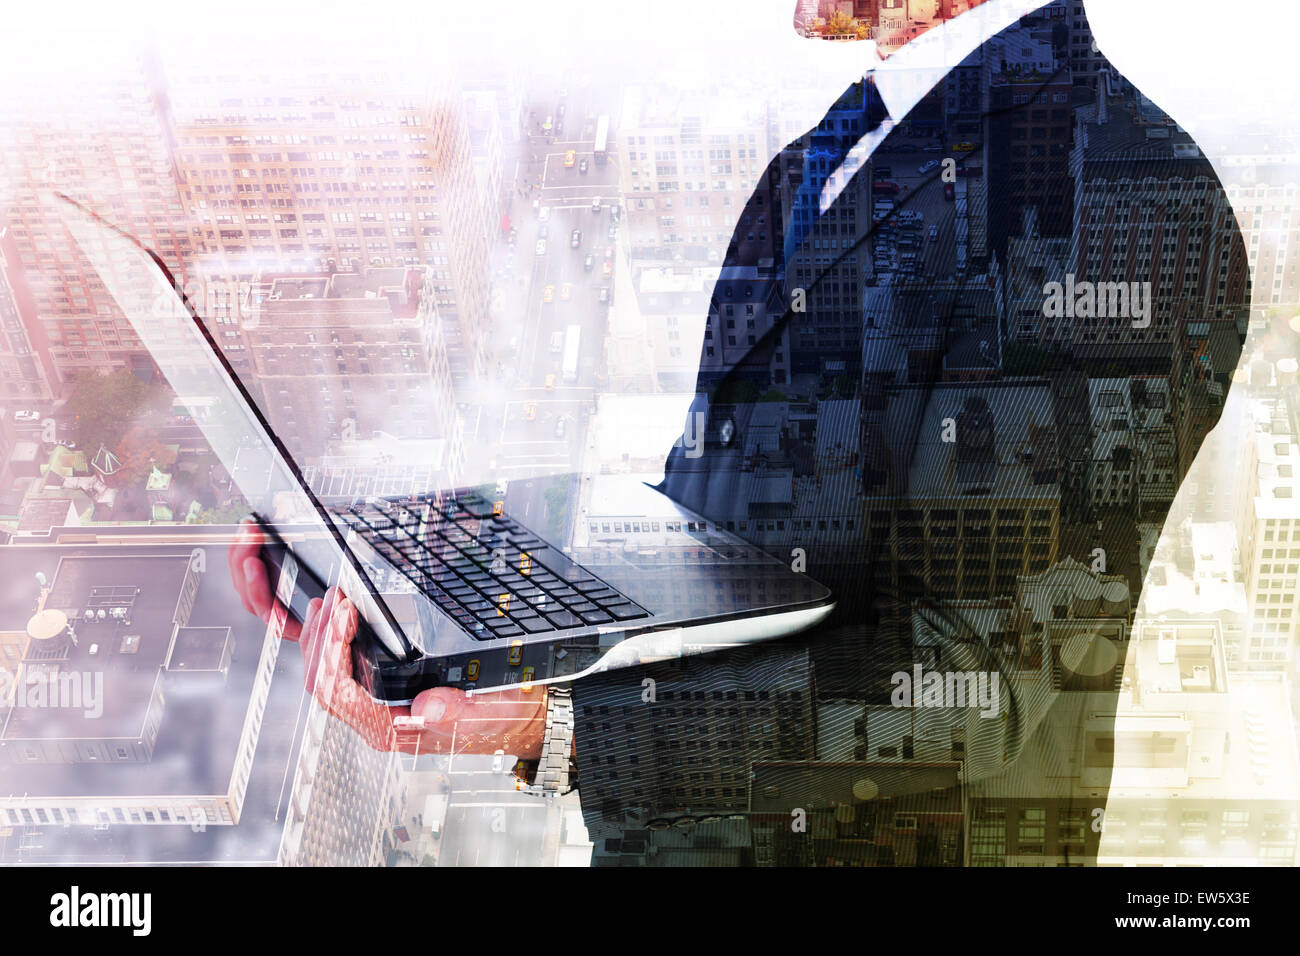 Composite image of businessman with watch using tablet pc Stock Photo